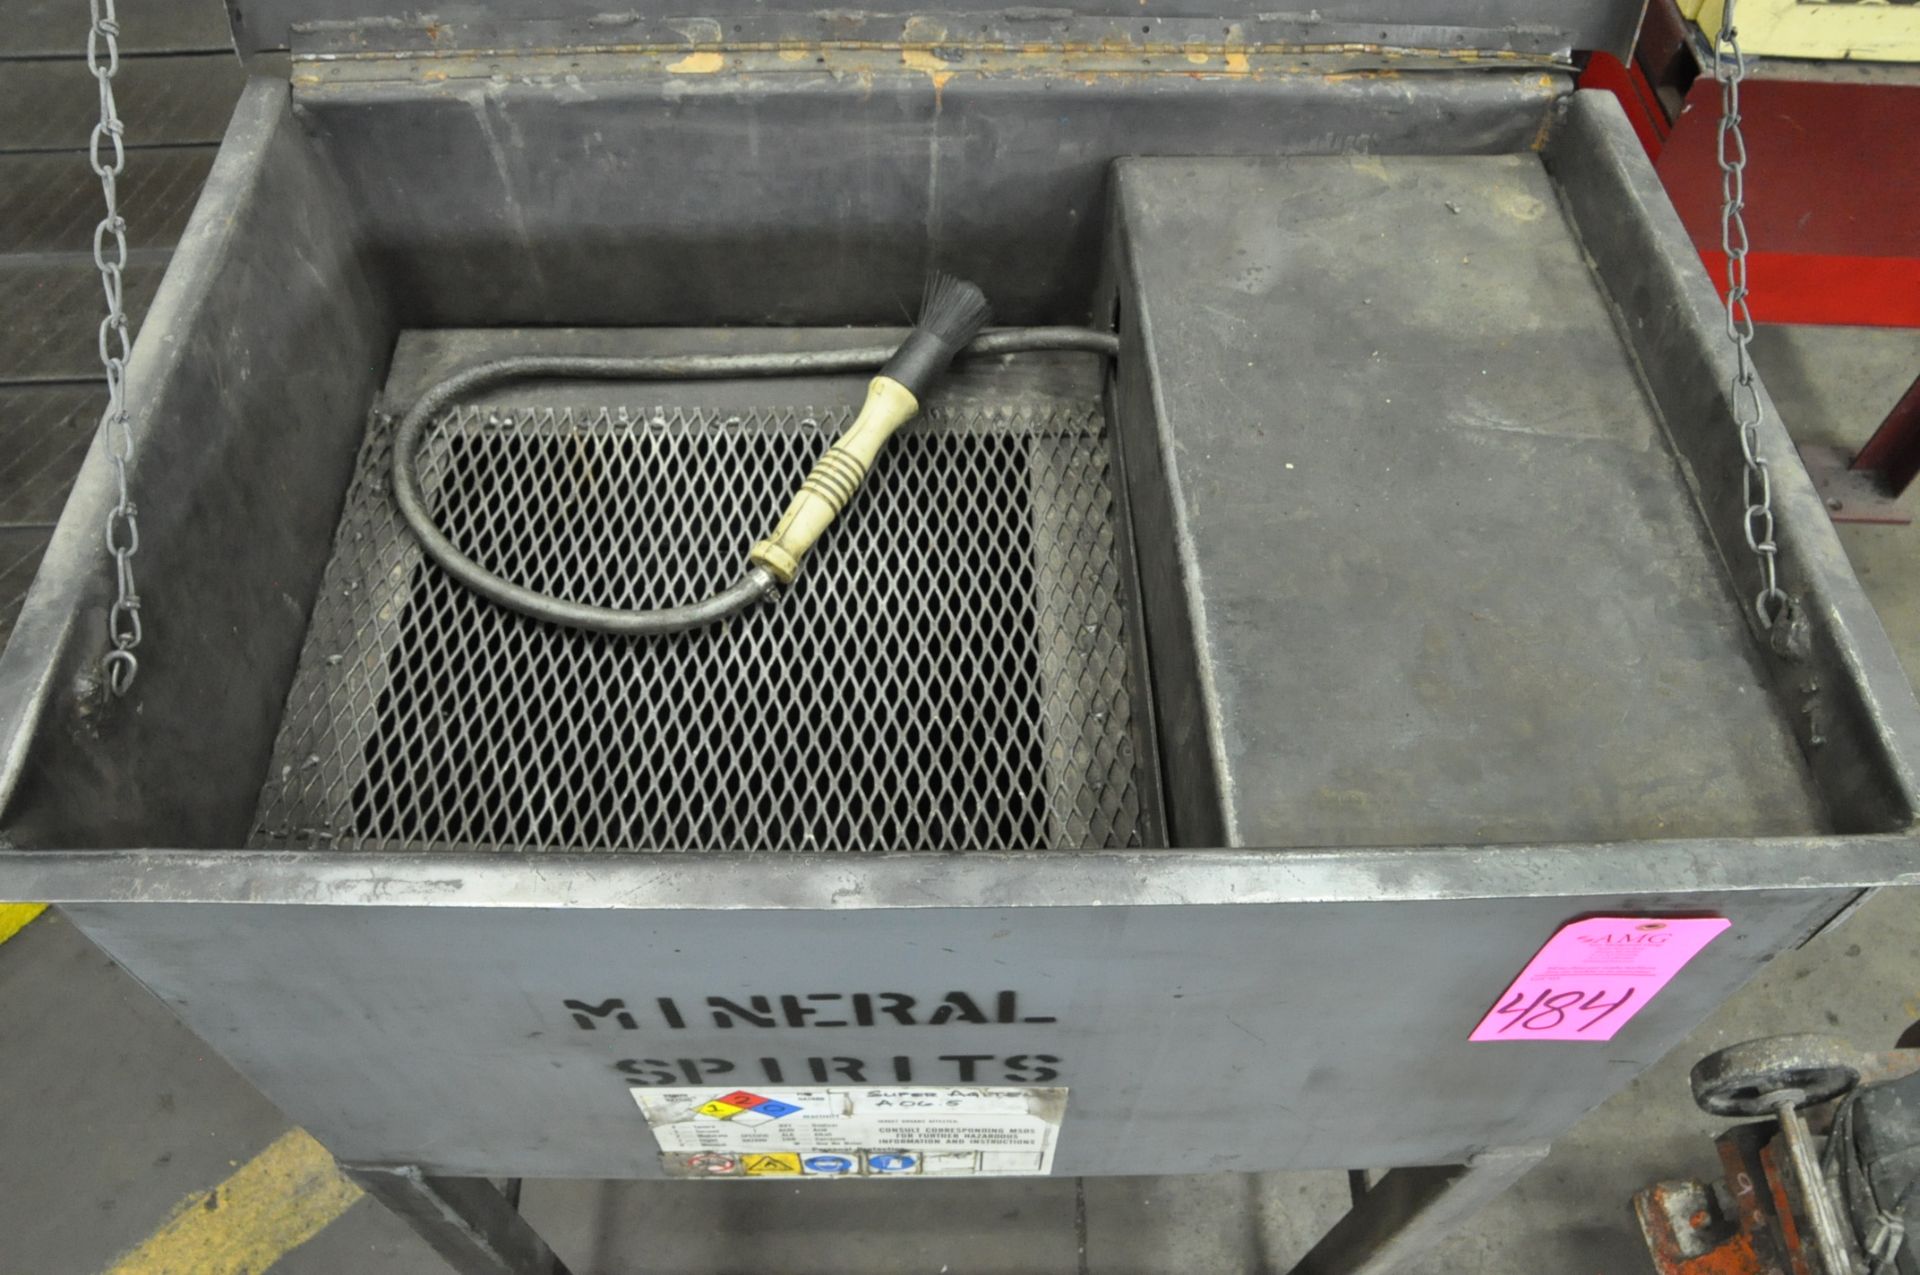 No Identifying Name 32" x 21" x 19"H Parts Washer, (F-16), (Pink Tag) - Image 3 of 3